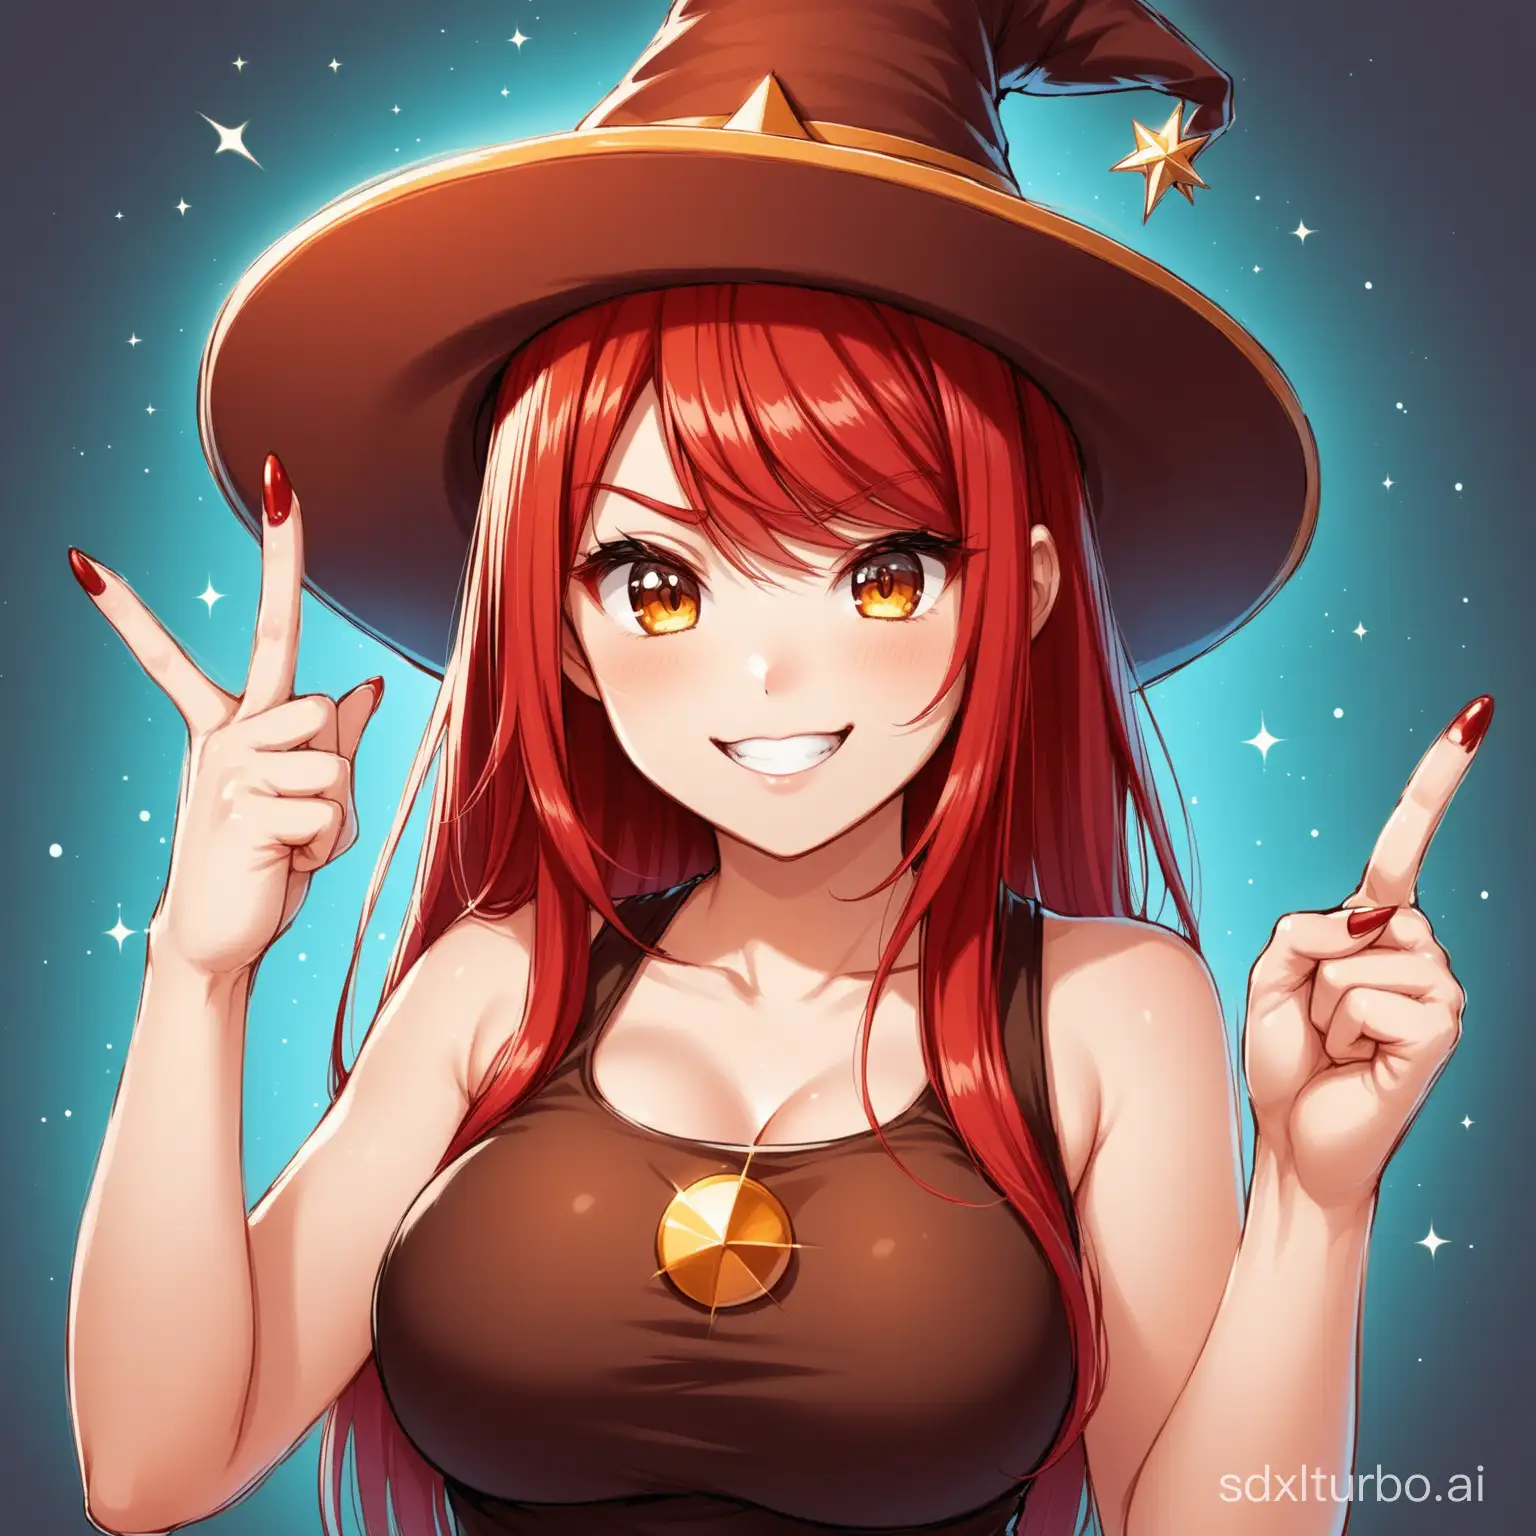 Fiery-RedHaired-Witch-Making-a-Defiant-Gesture